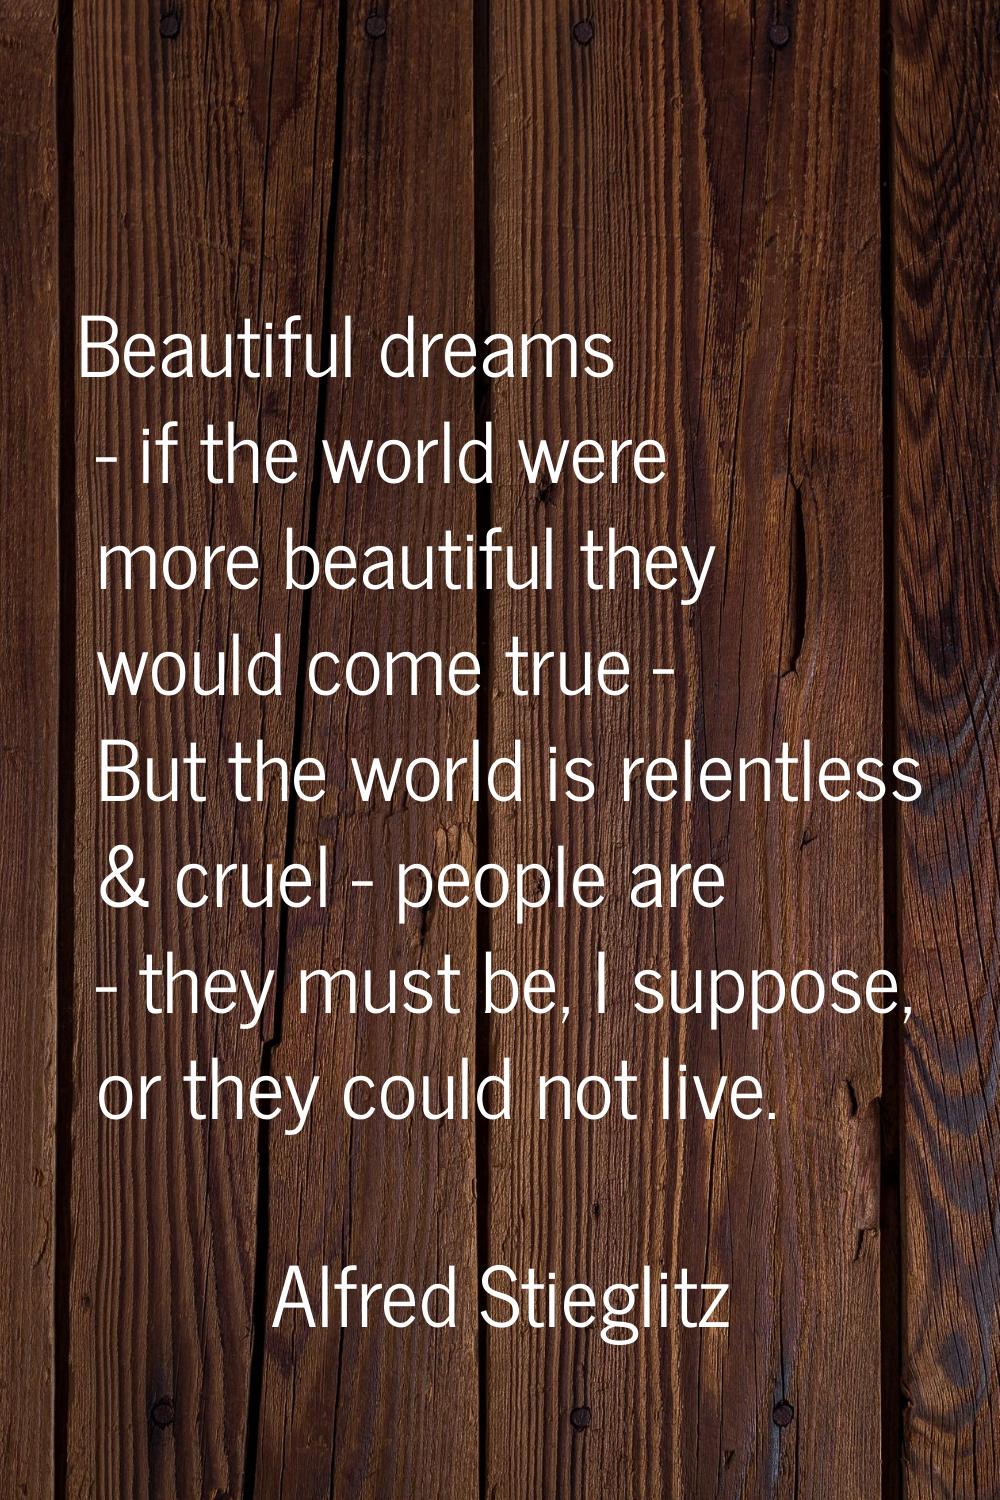 Beautiful dreams - if the world were more beautiful they would come true - But the world is relentl